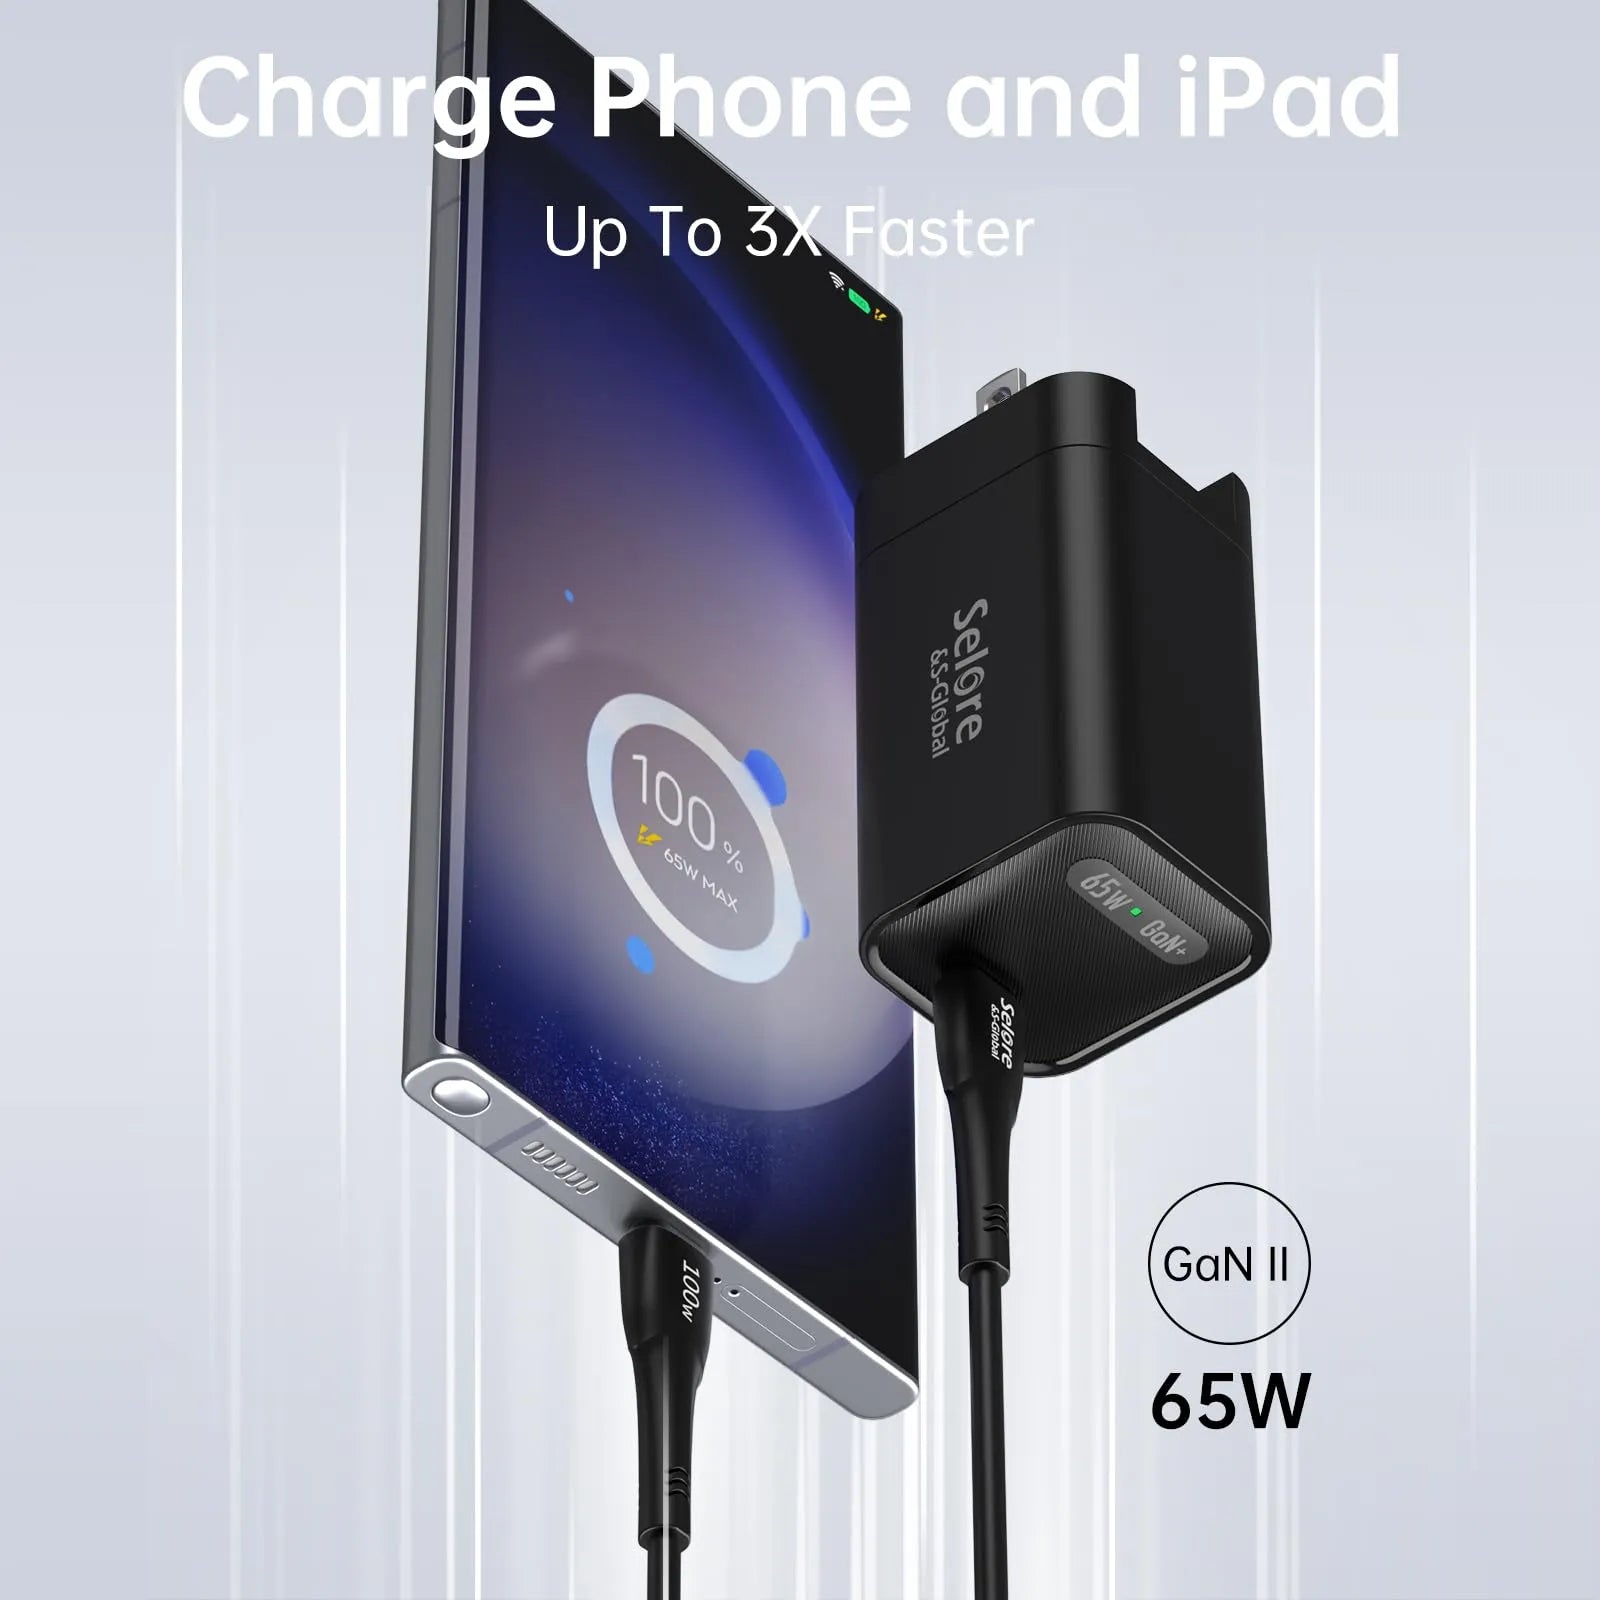 SELORE 65W Type C Charging Block Wall Charger